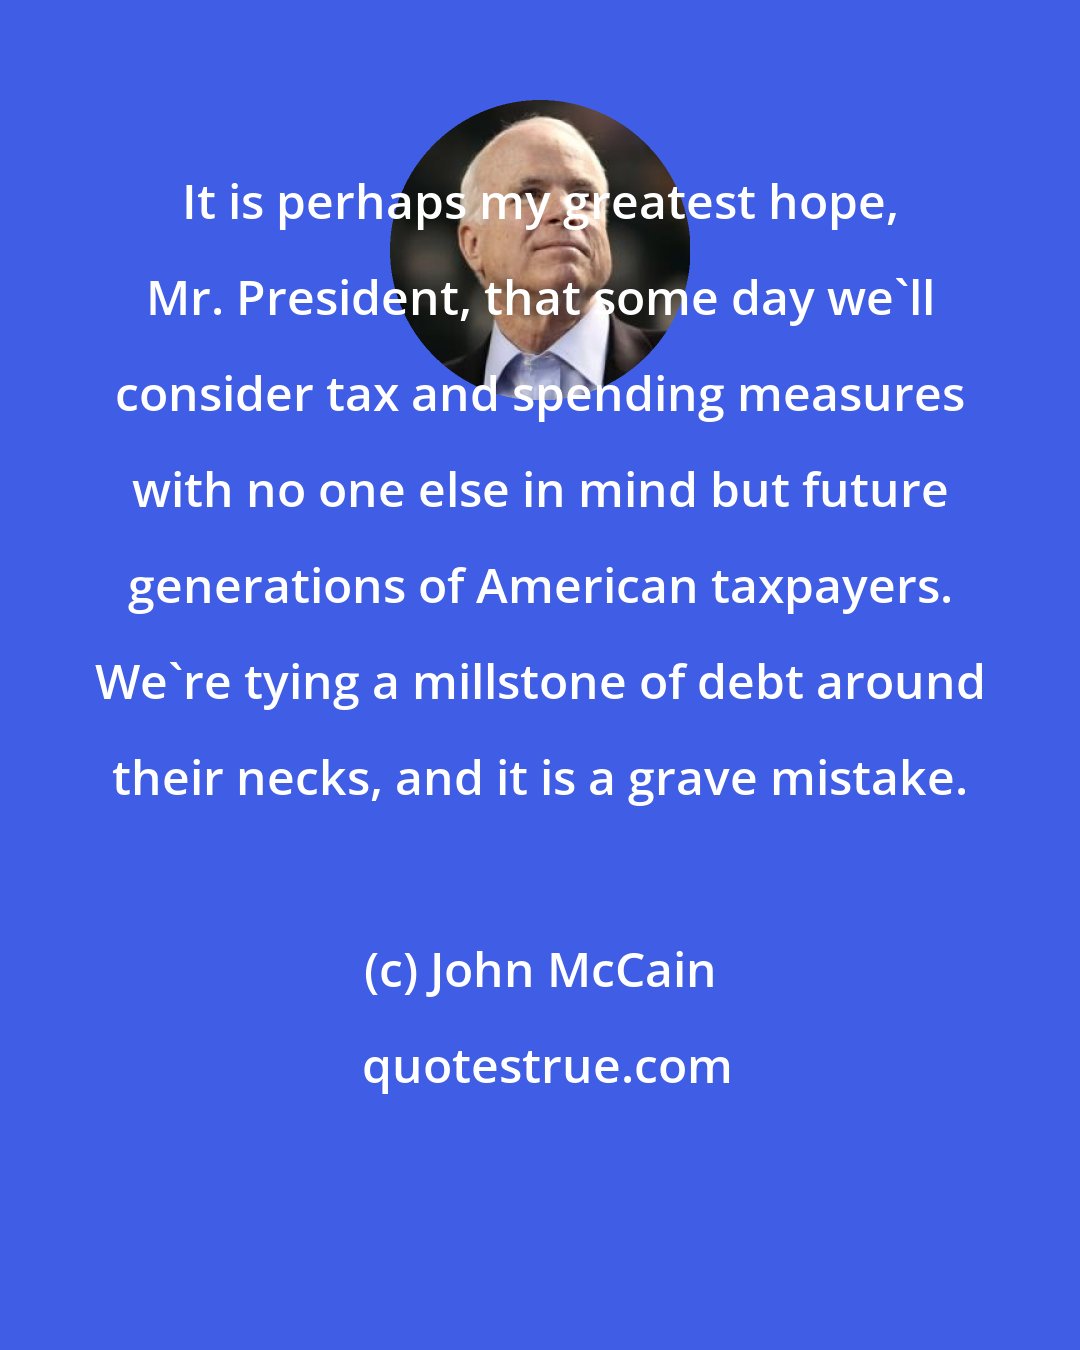 John McCain: It is perhaps my greatest hope, Mr. President, that some day we'll consider tax and spending measures with no one else in mind but future generations of American taxpayers. We're tying a millstone of debt around their necks, and it is a grave mistake.